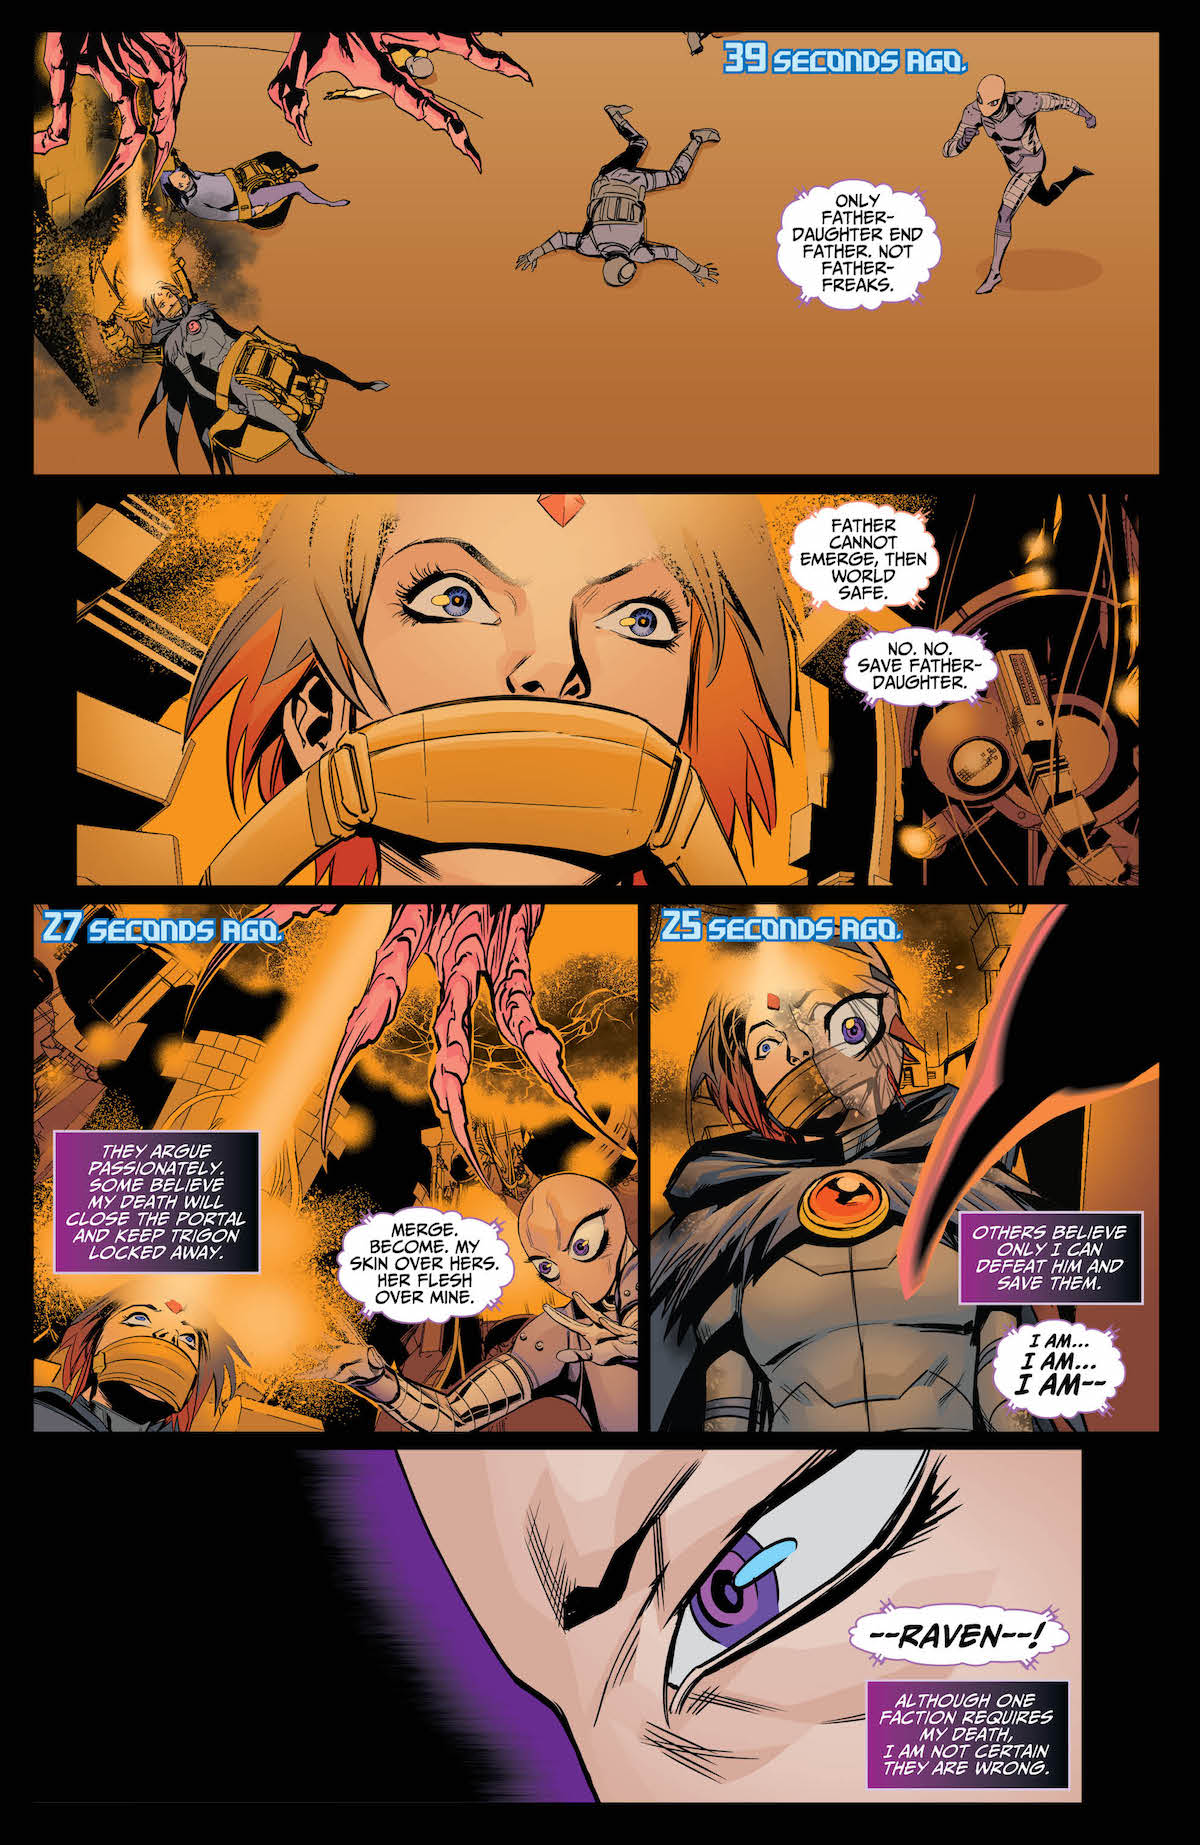 Raven: Daughter of Darkness #6 page 2